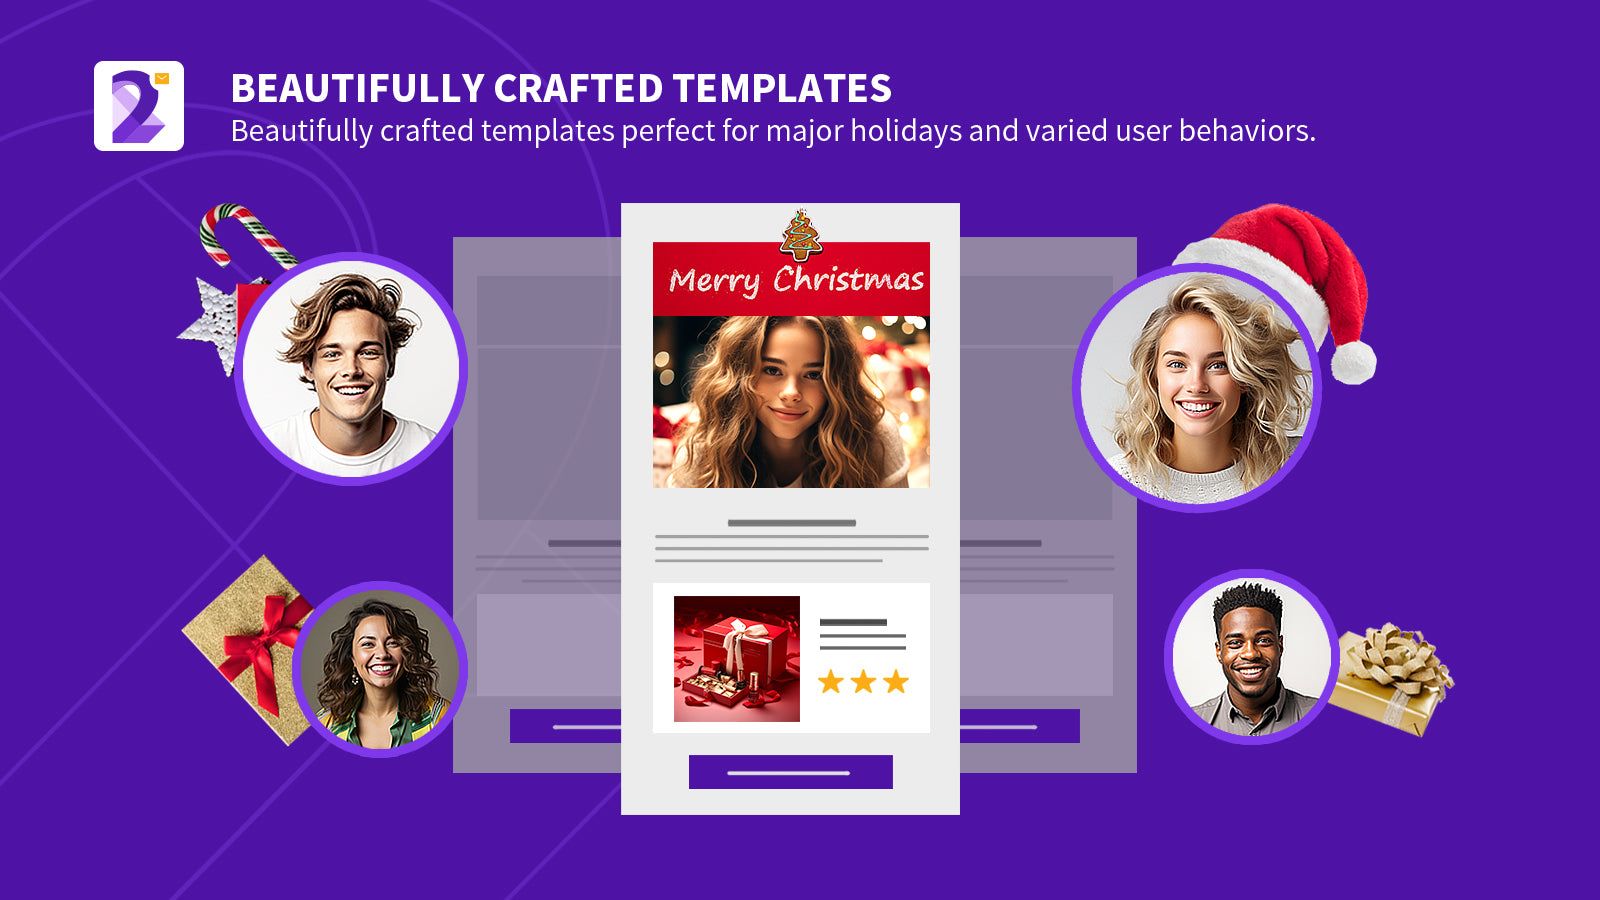 BEAUTIFULLY CRAFTED TEMPLATES